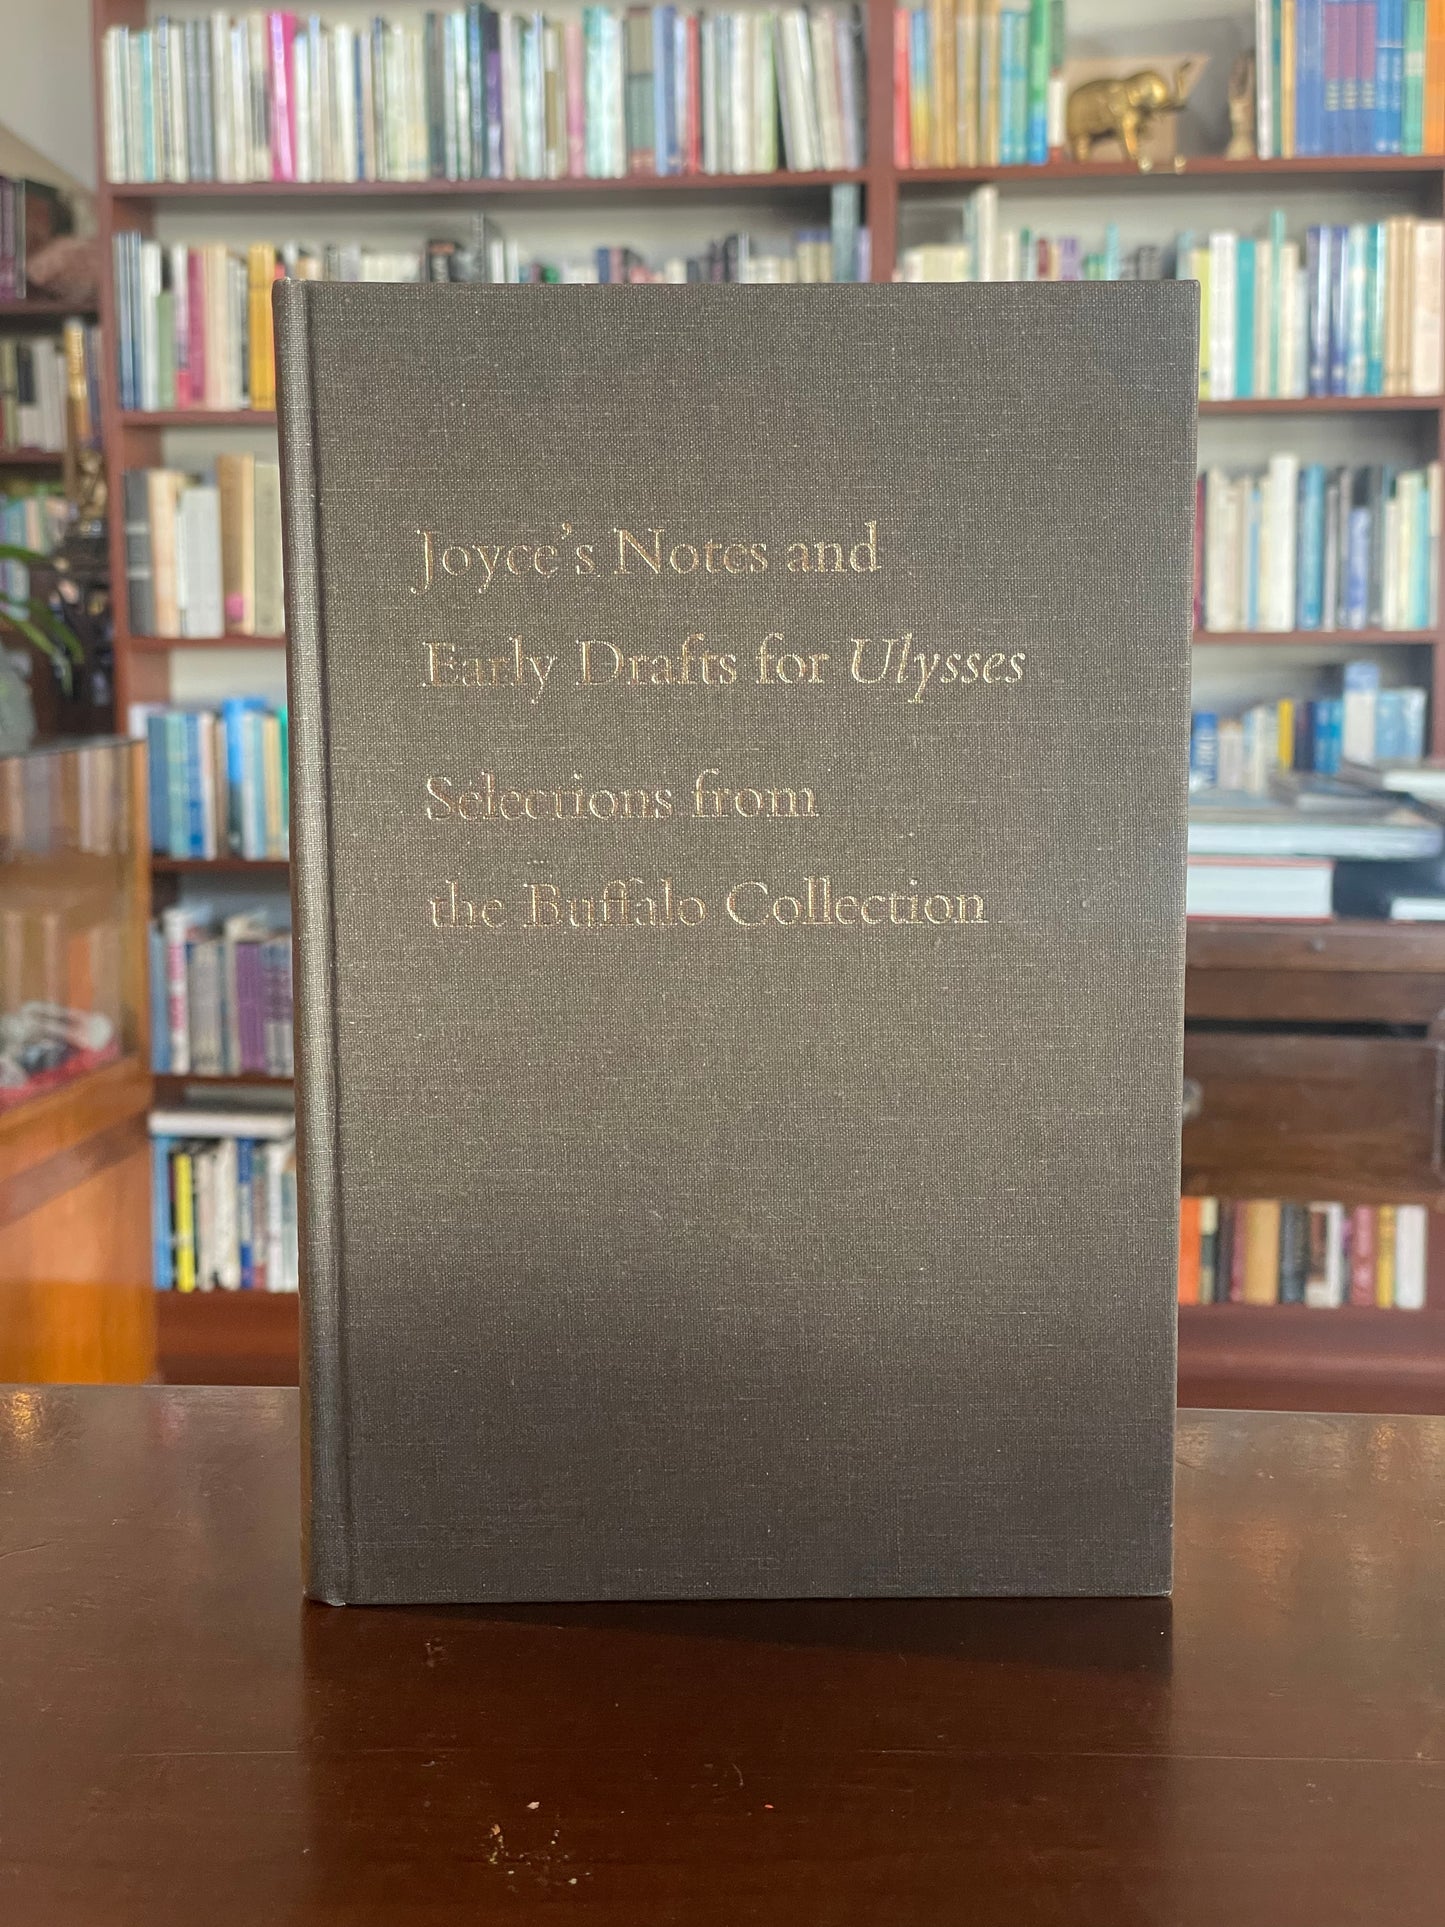 Joyce’s Notes and Early Drafts for Ulysses